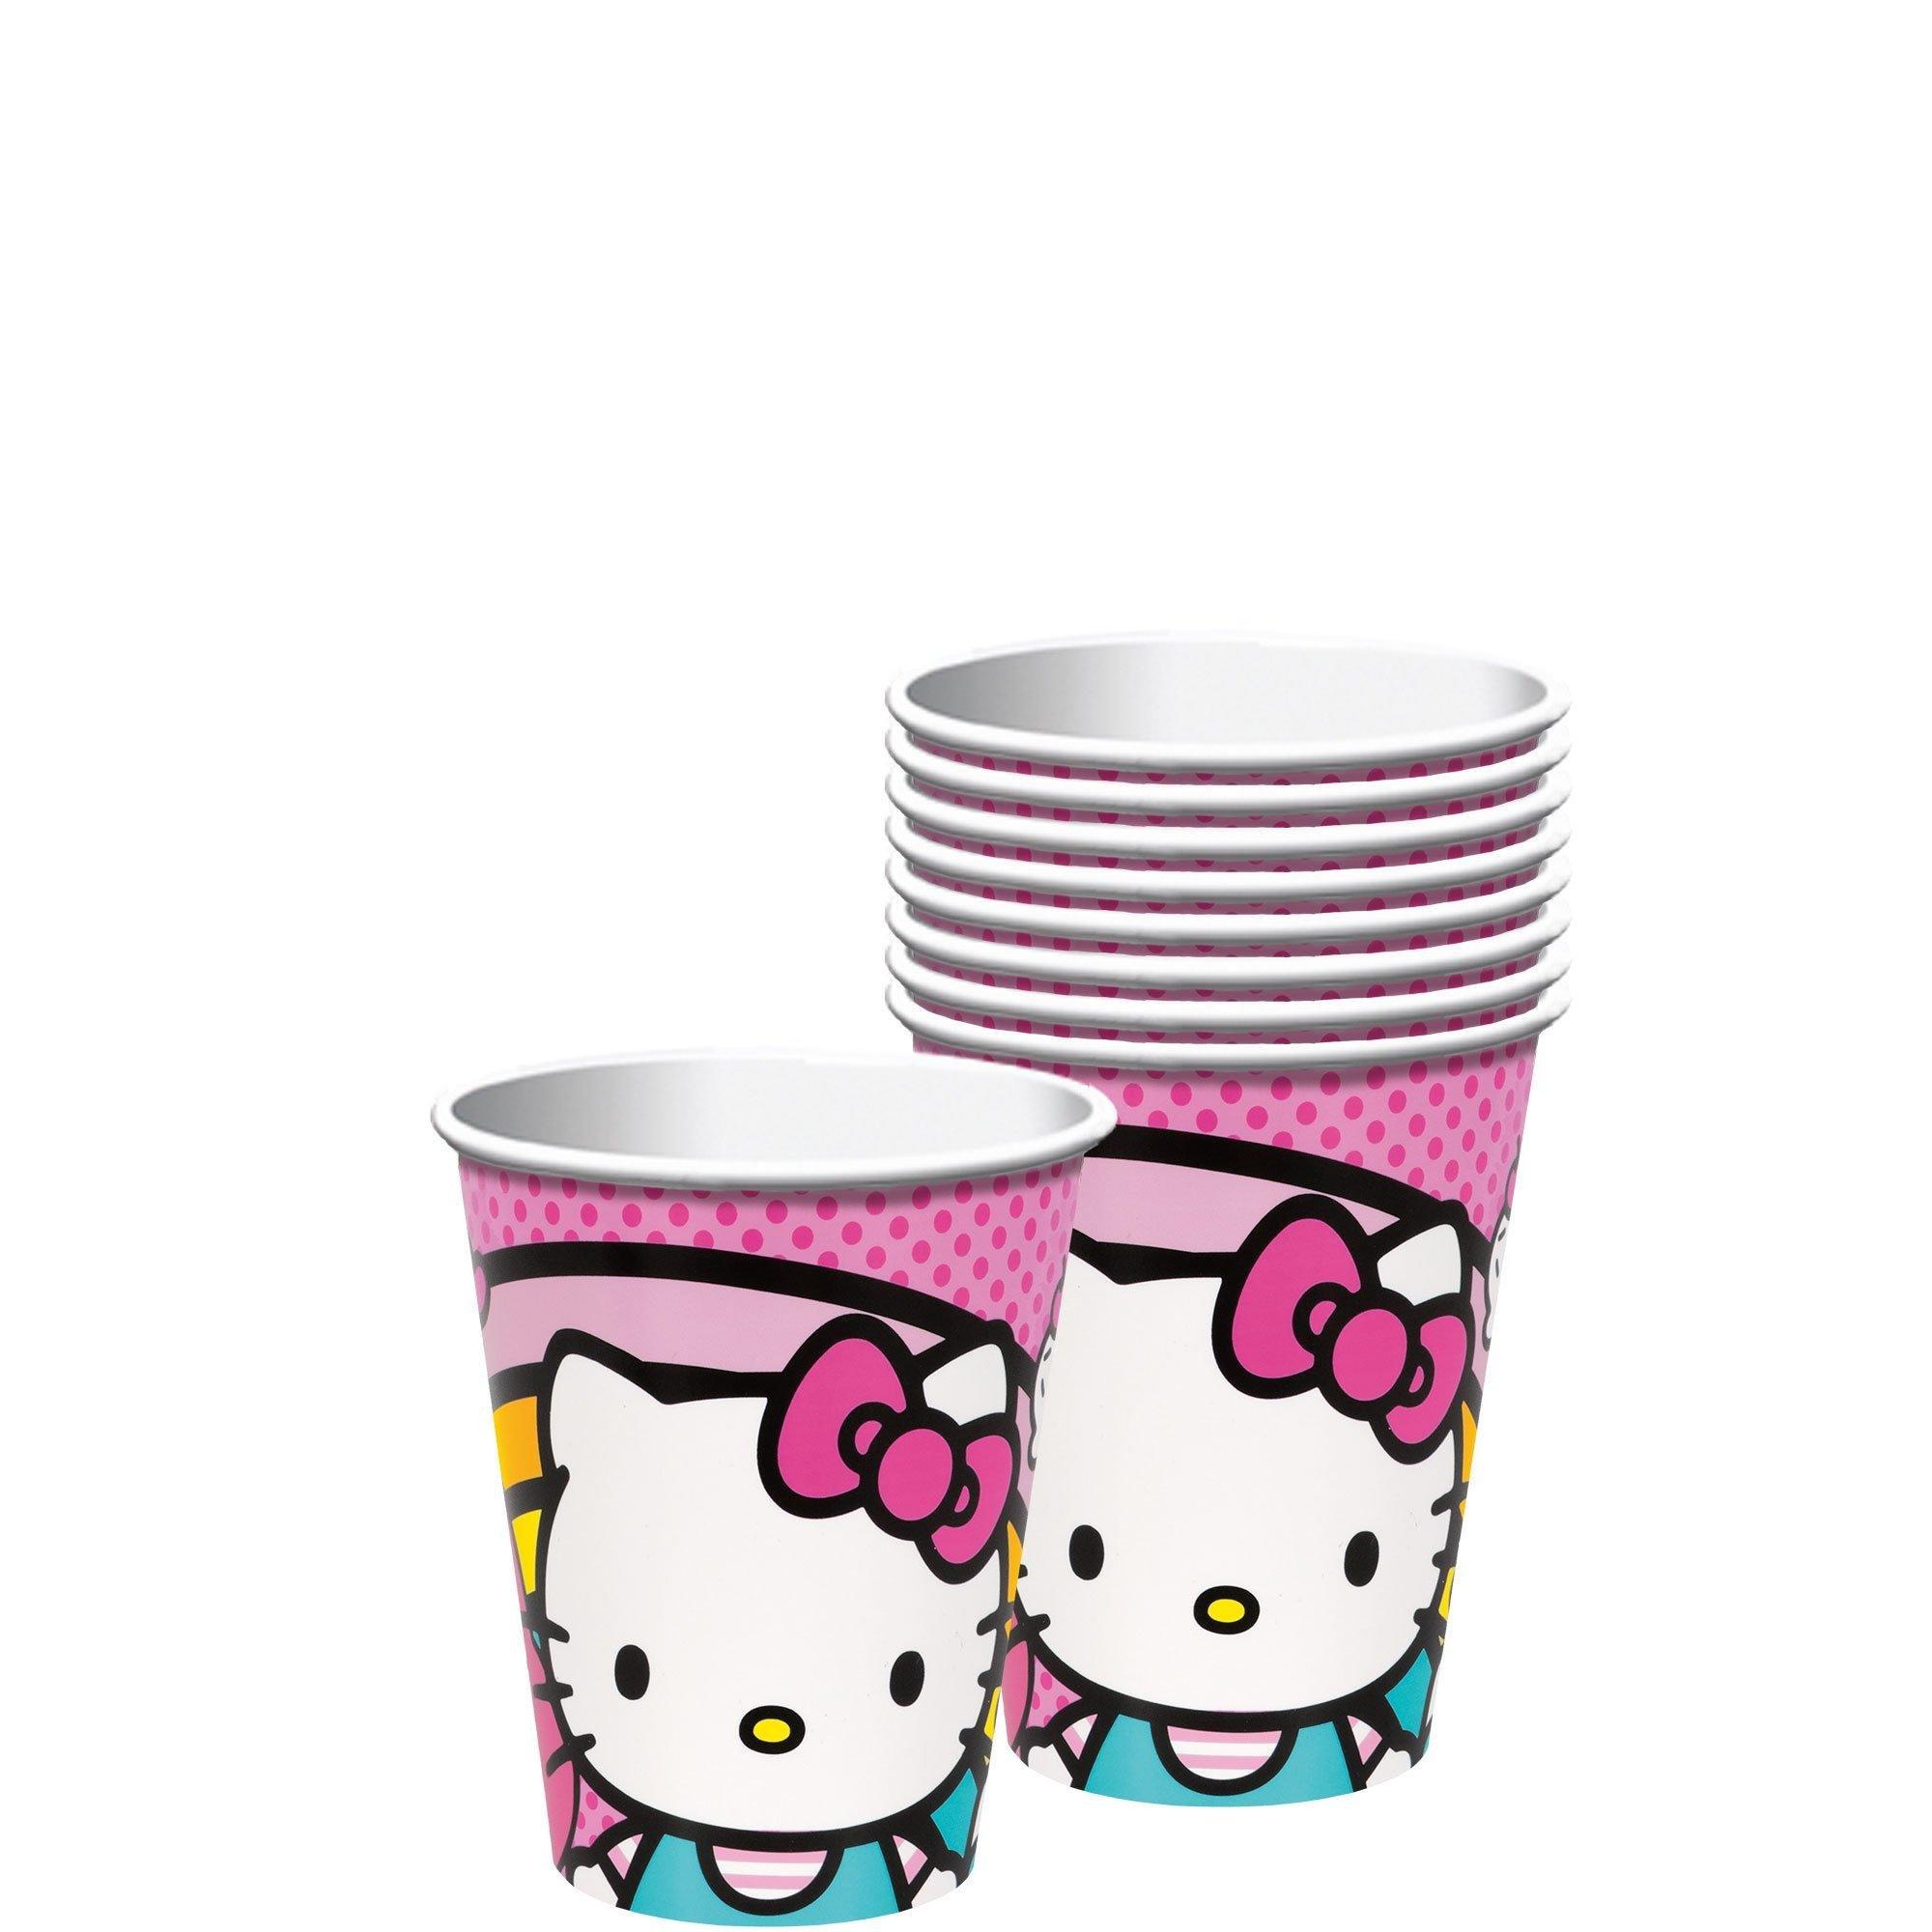 Hello Kitty and Friends Party Supplies Pack for 8 Guests - Kit Includes Plates, Napkins, Cups, Table Cover & Latex Balloons